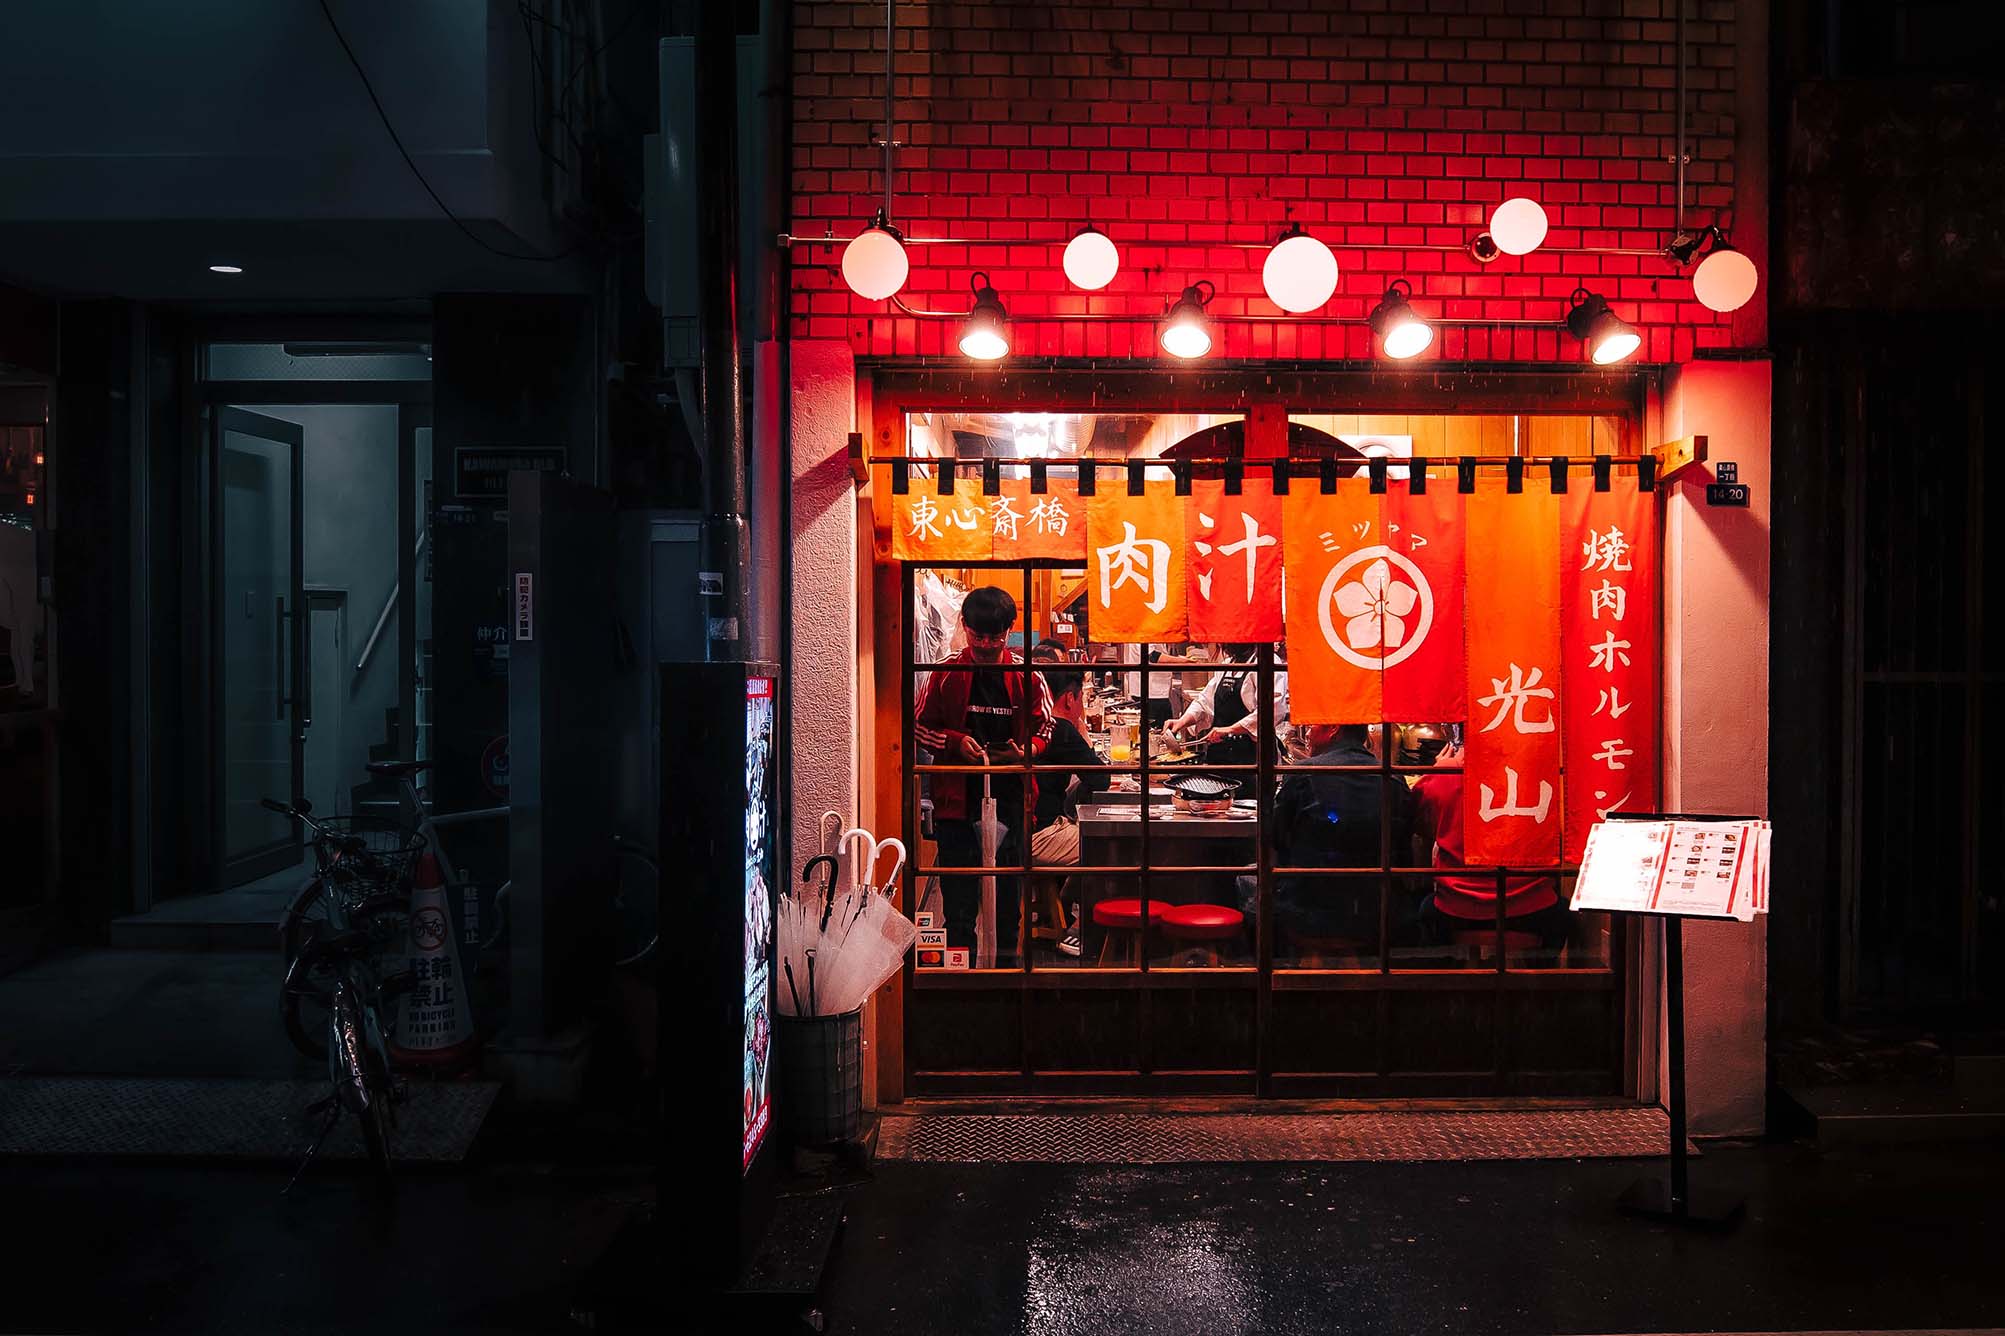 The front entrance to a yakiniku restaurant in Osaka.